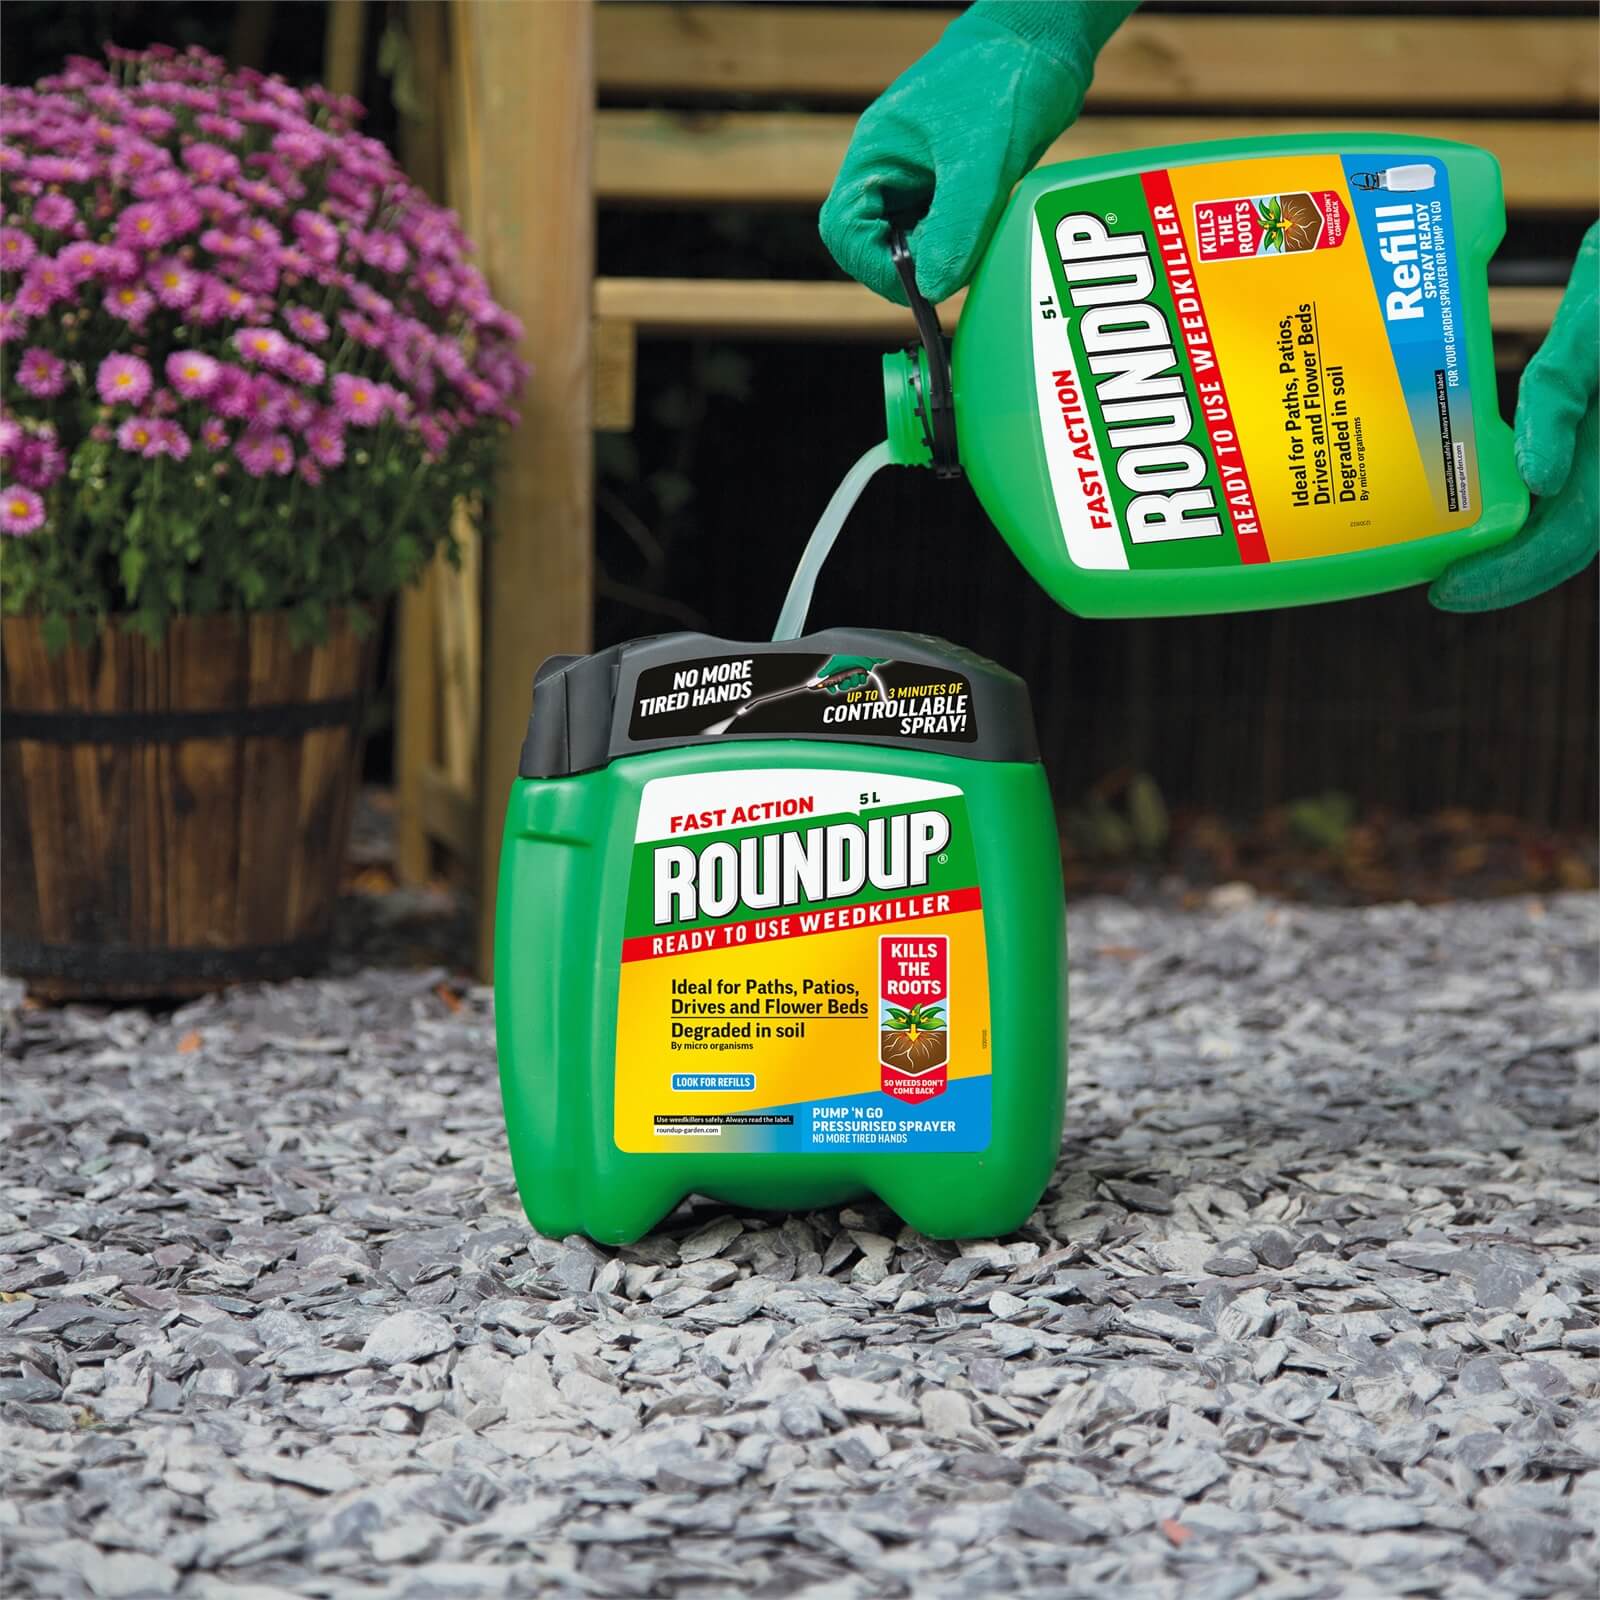 Roundup Total Ready To Use Pump N Go Weedkiller Refill - 5L